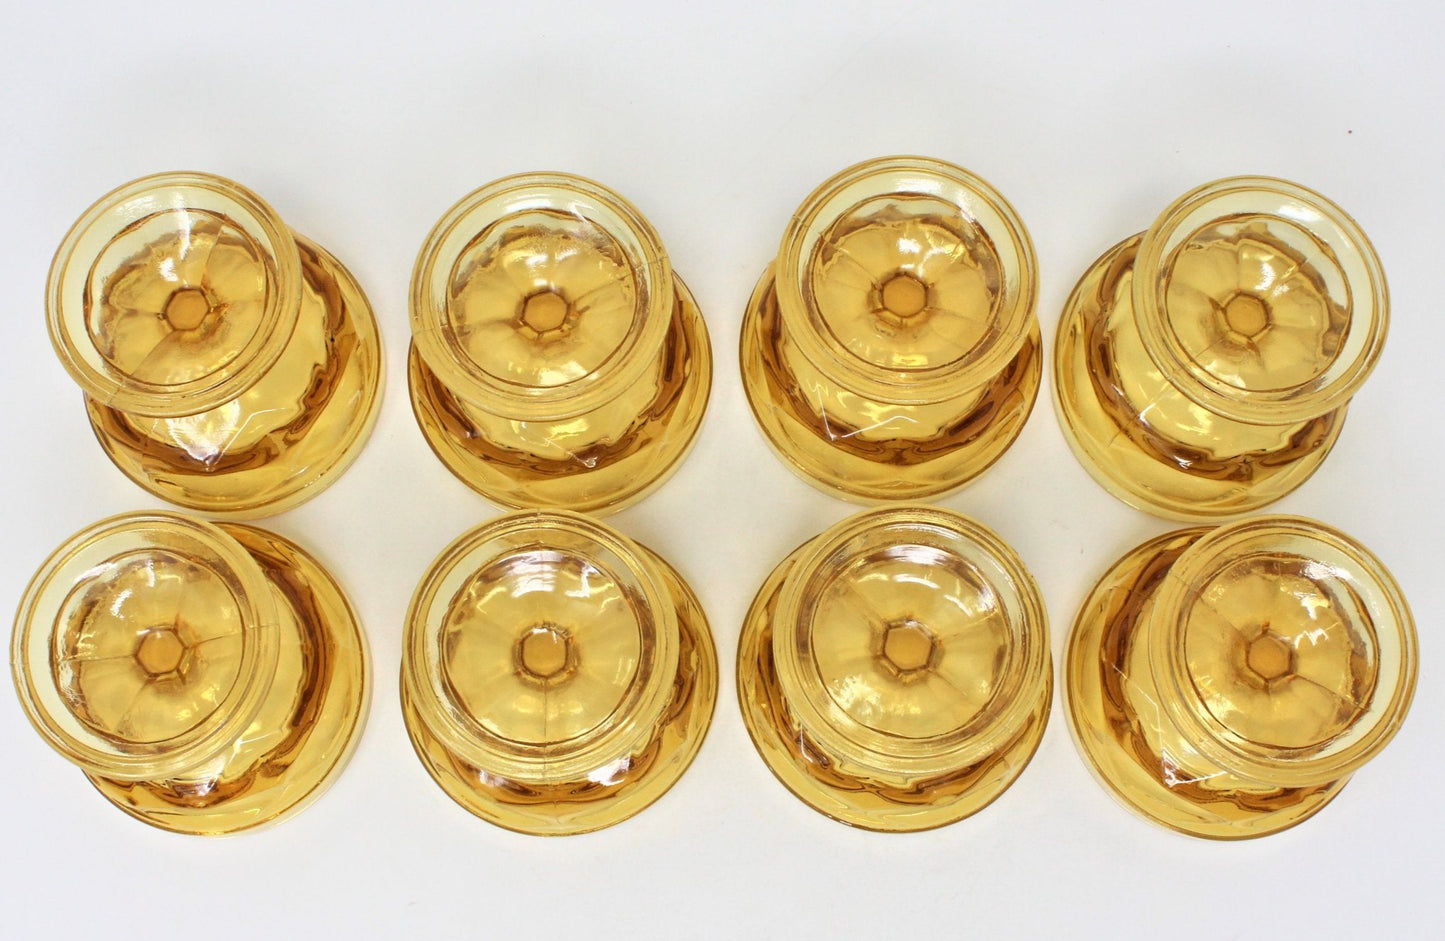 Champagne / Low Sherbet, Anchor Hocking, Fairfield Amber Glass, Set of 8, Vintage